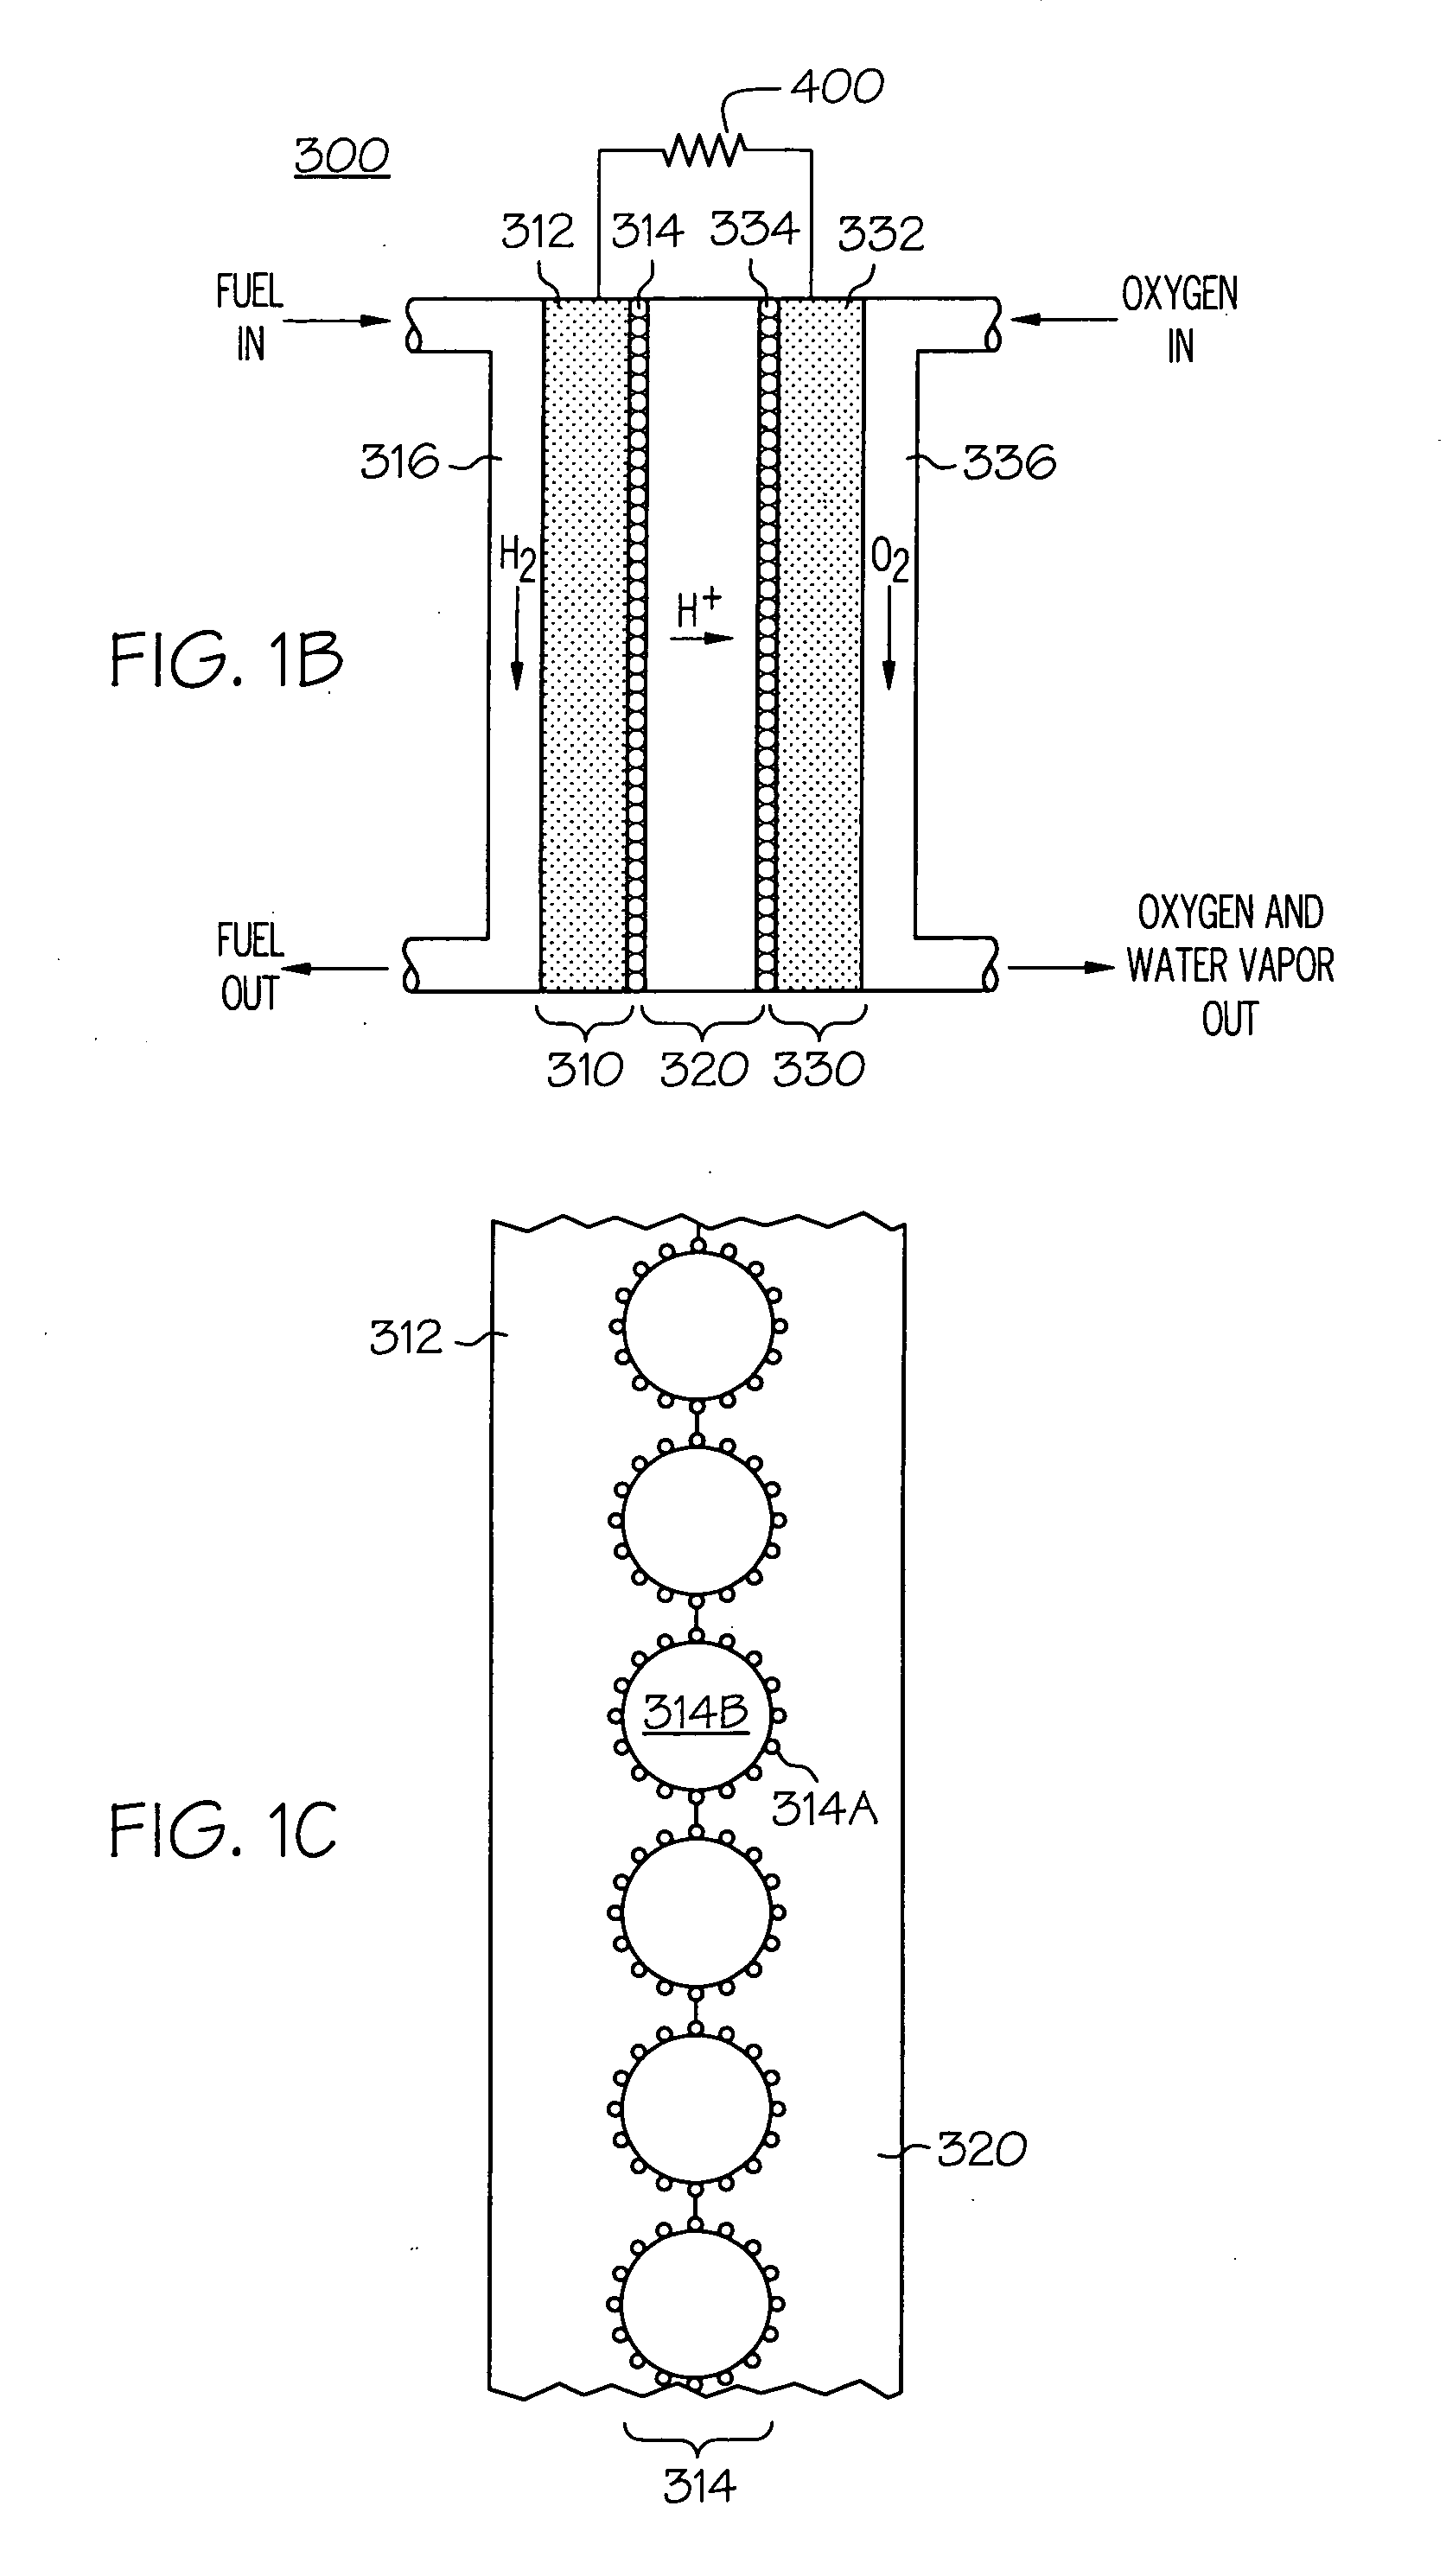 Fuel cell shutdown and startup using a cathode recycle loop